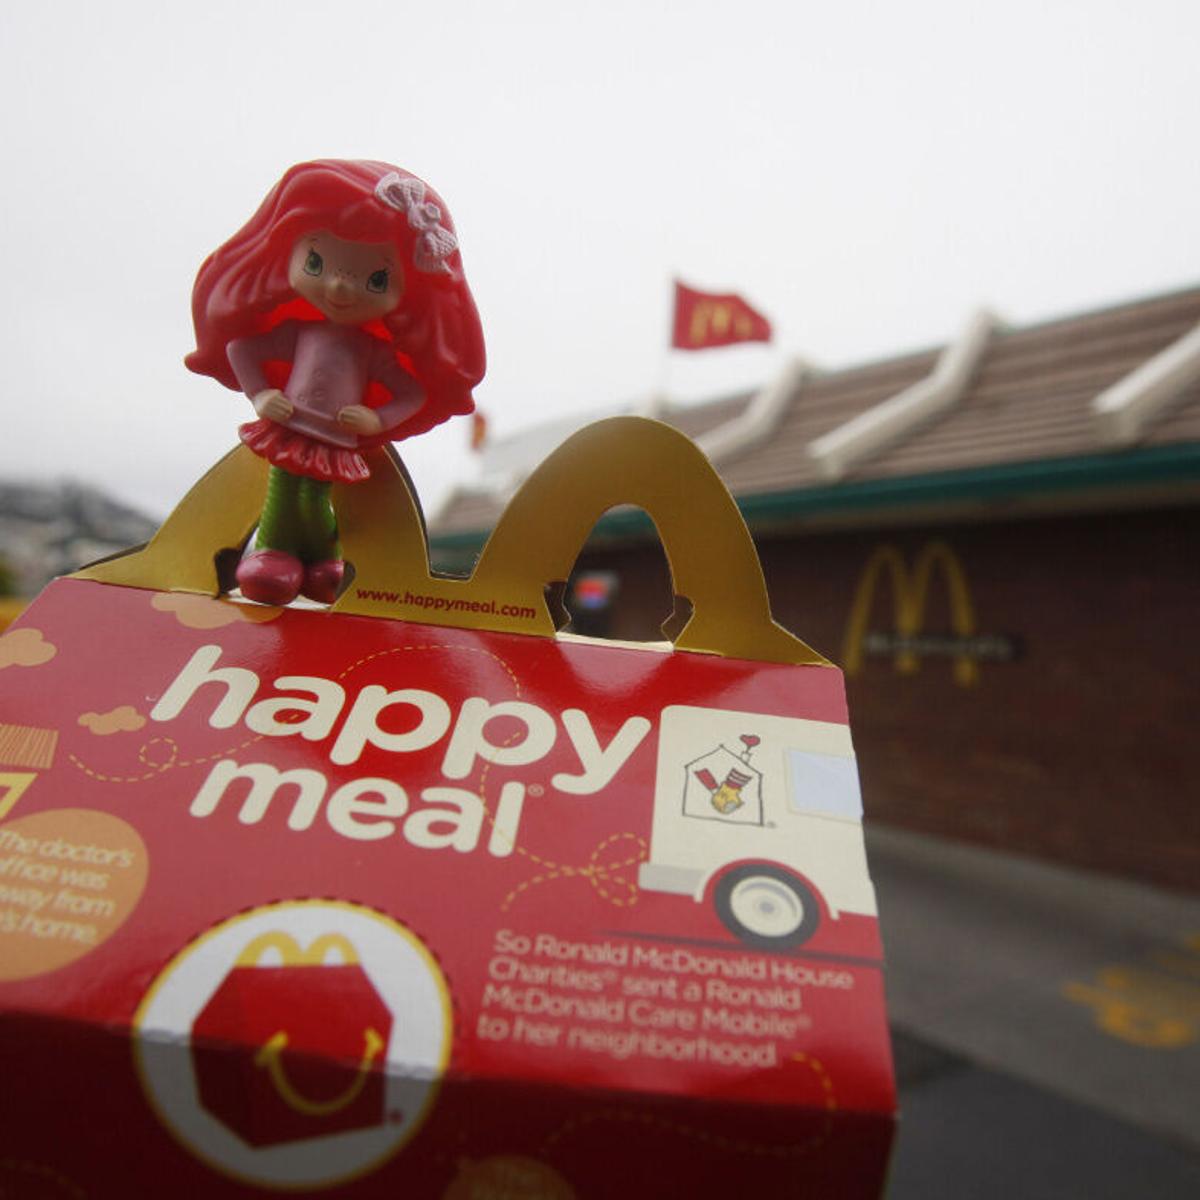 Tour Of The Site Where Happy Meal Toys